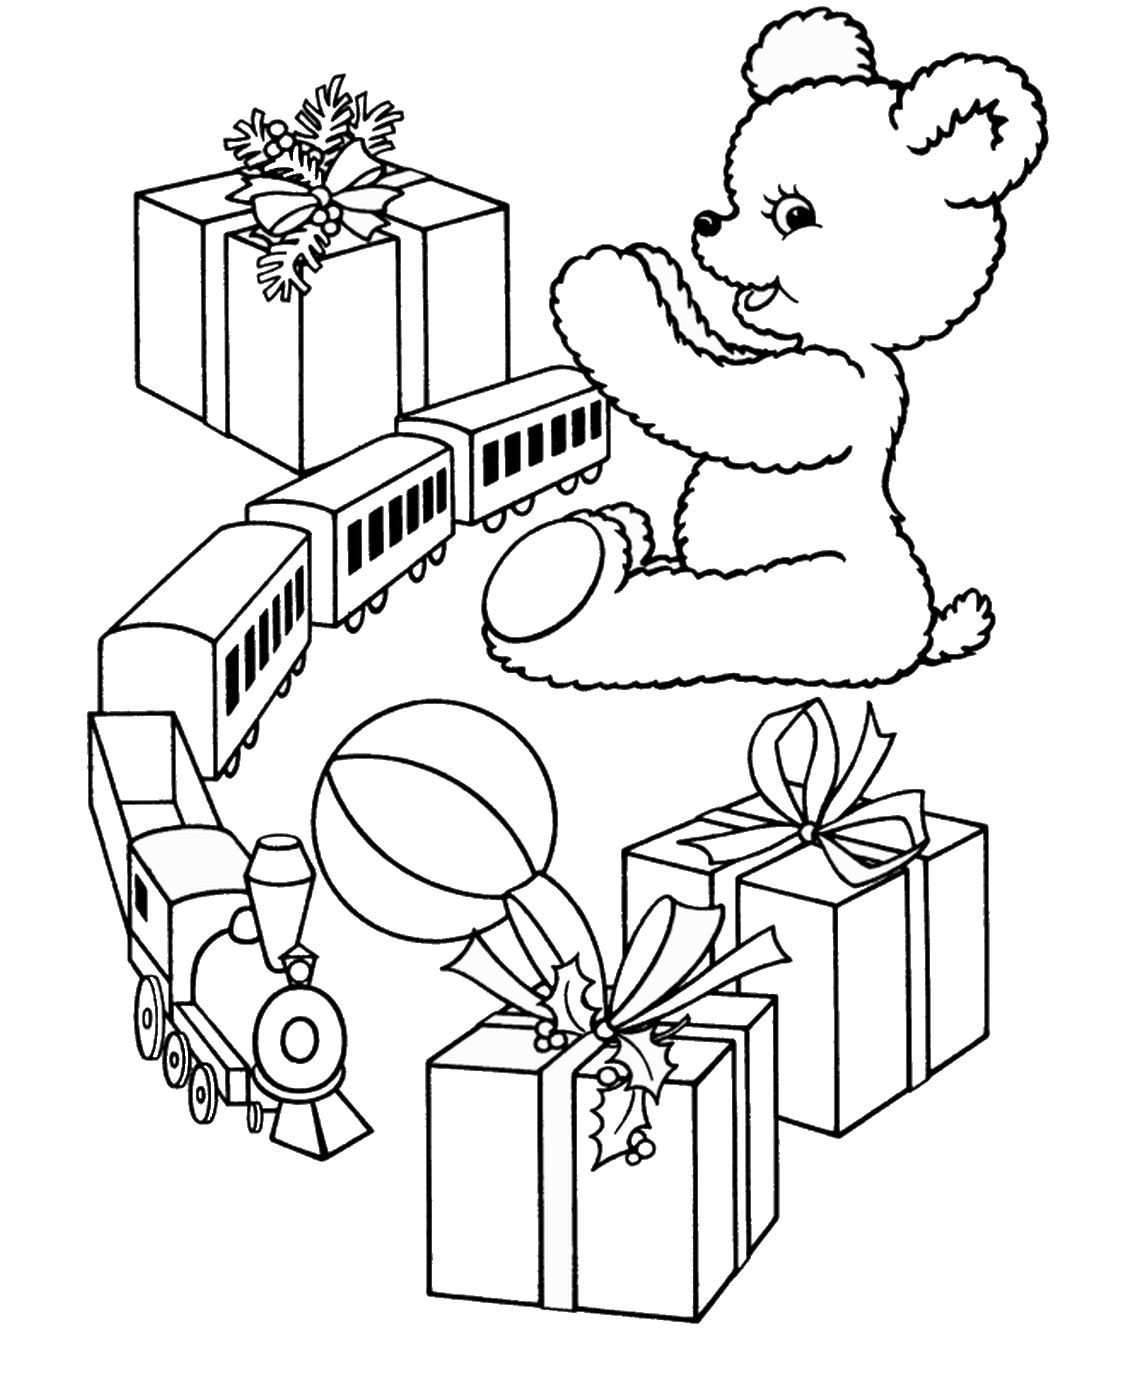 christmas presents coloring pages presents coloring pages best coloring pages for kids coloring pages christmas presents 